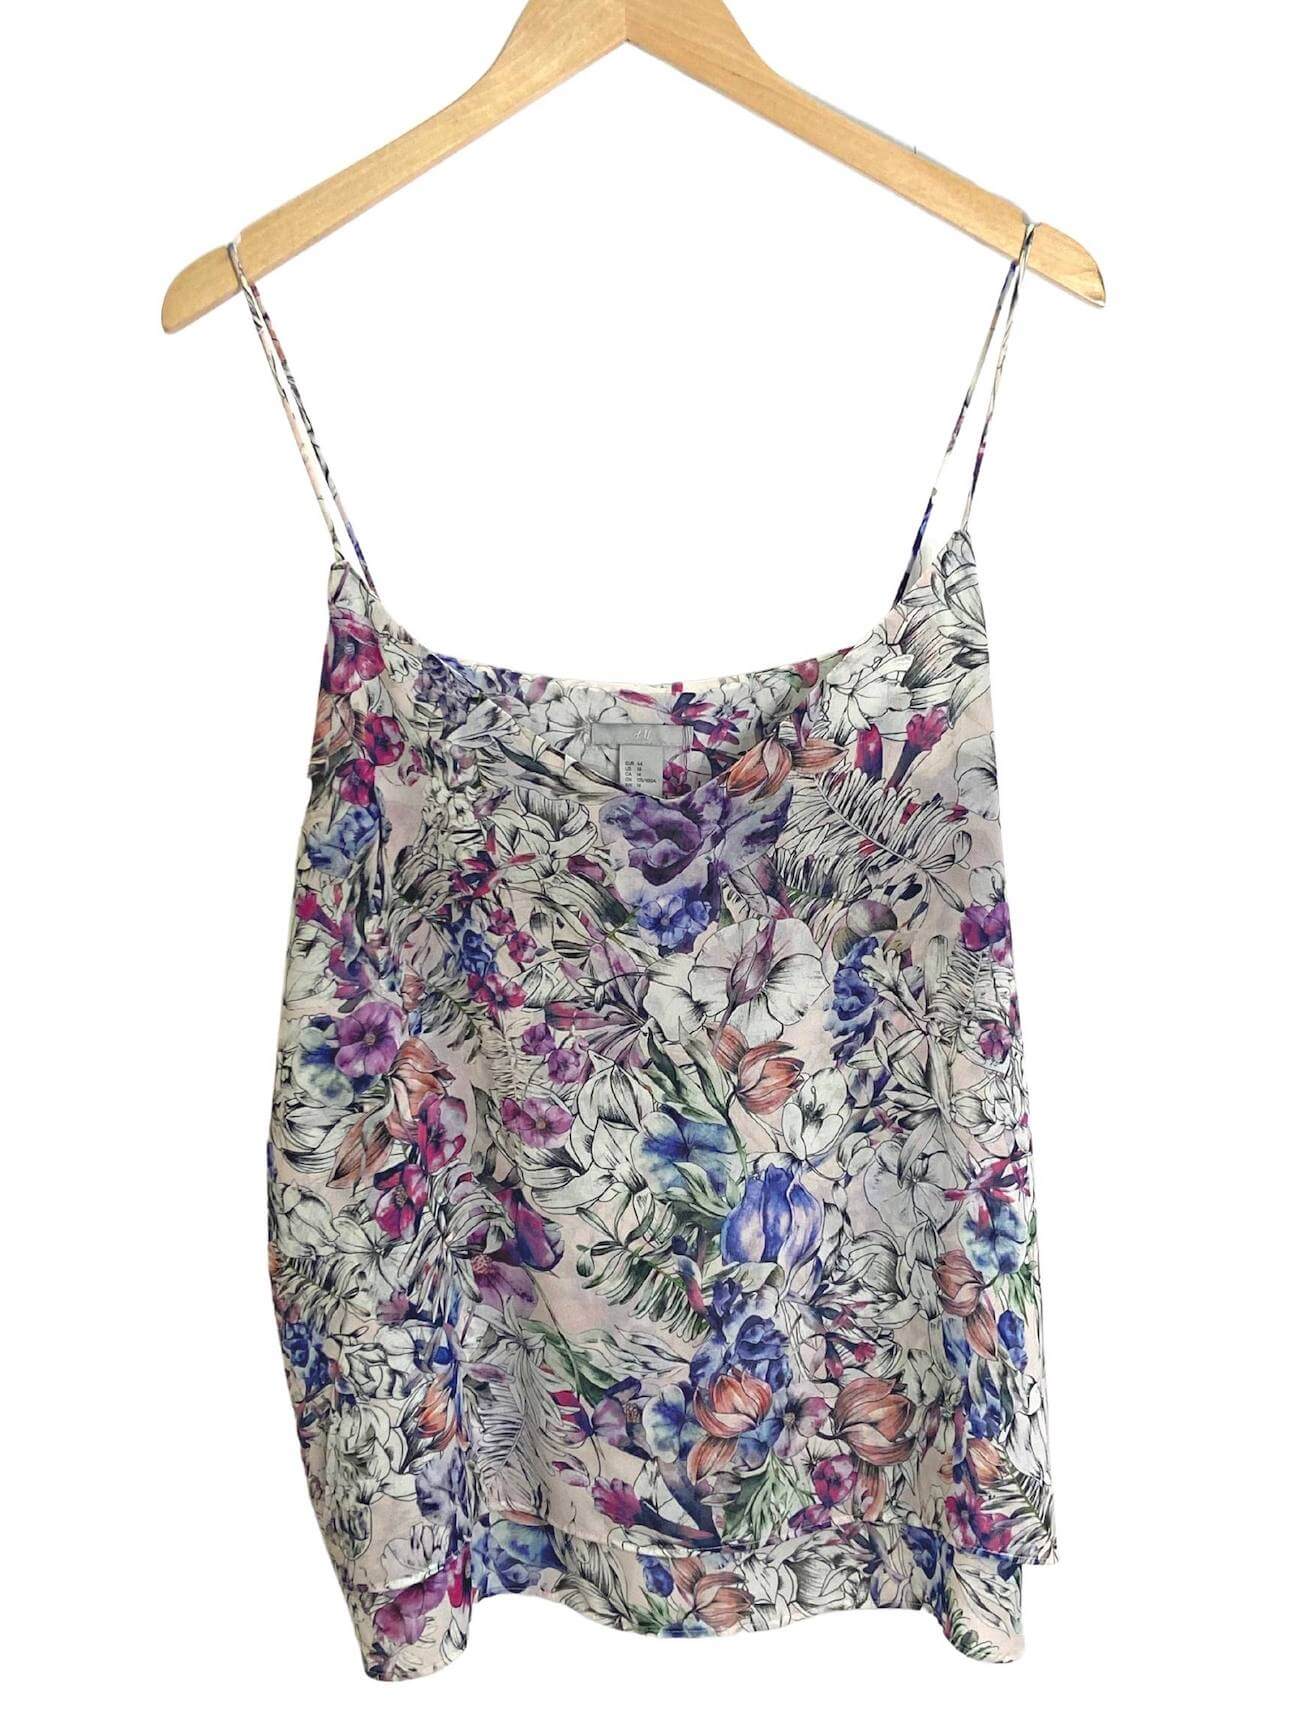 Cool Summer H&M floral camisole